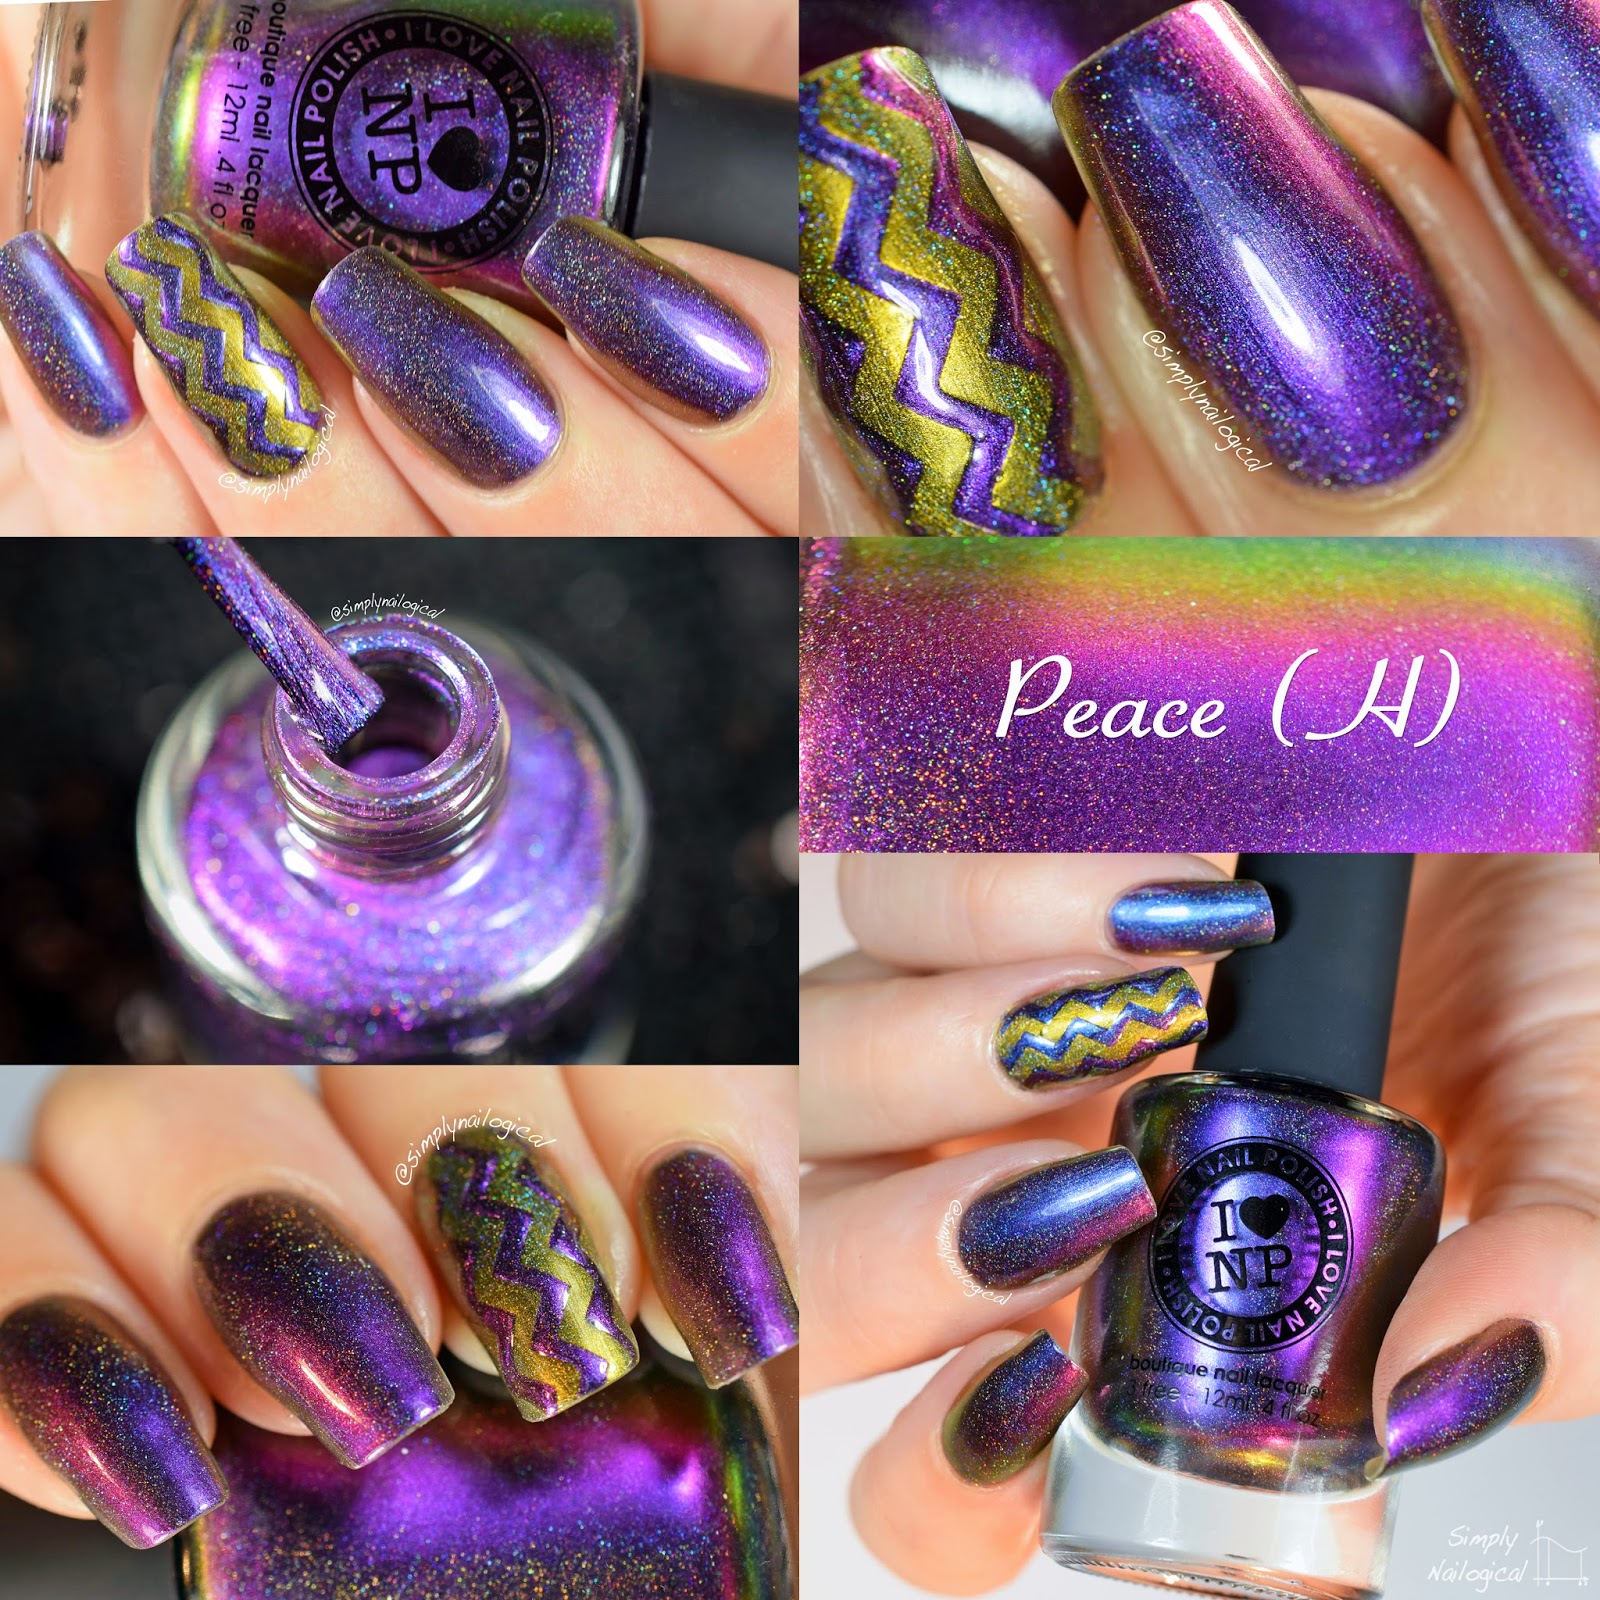 Peace (H)  - ILNP Fall 2014 collection swatch